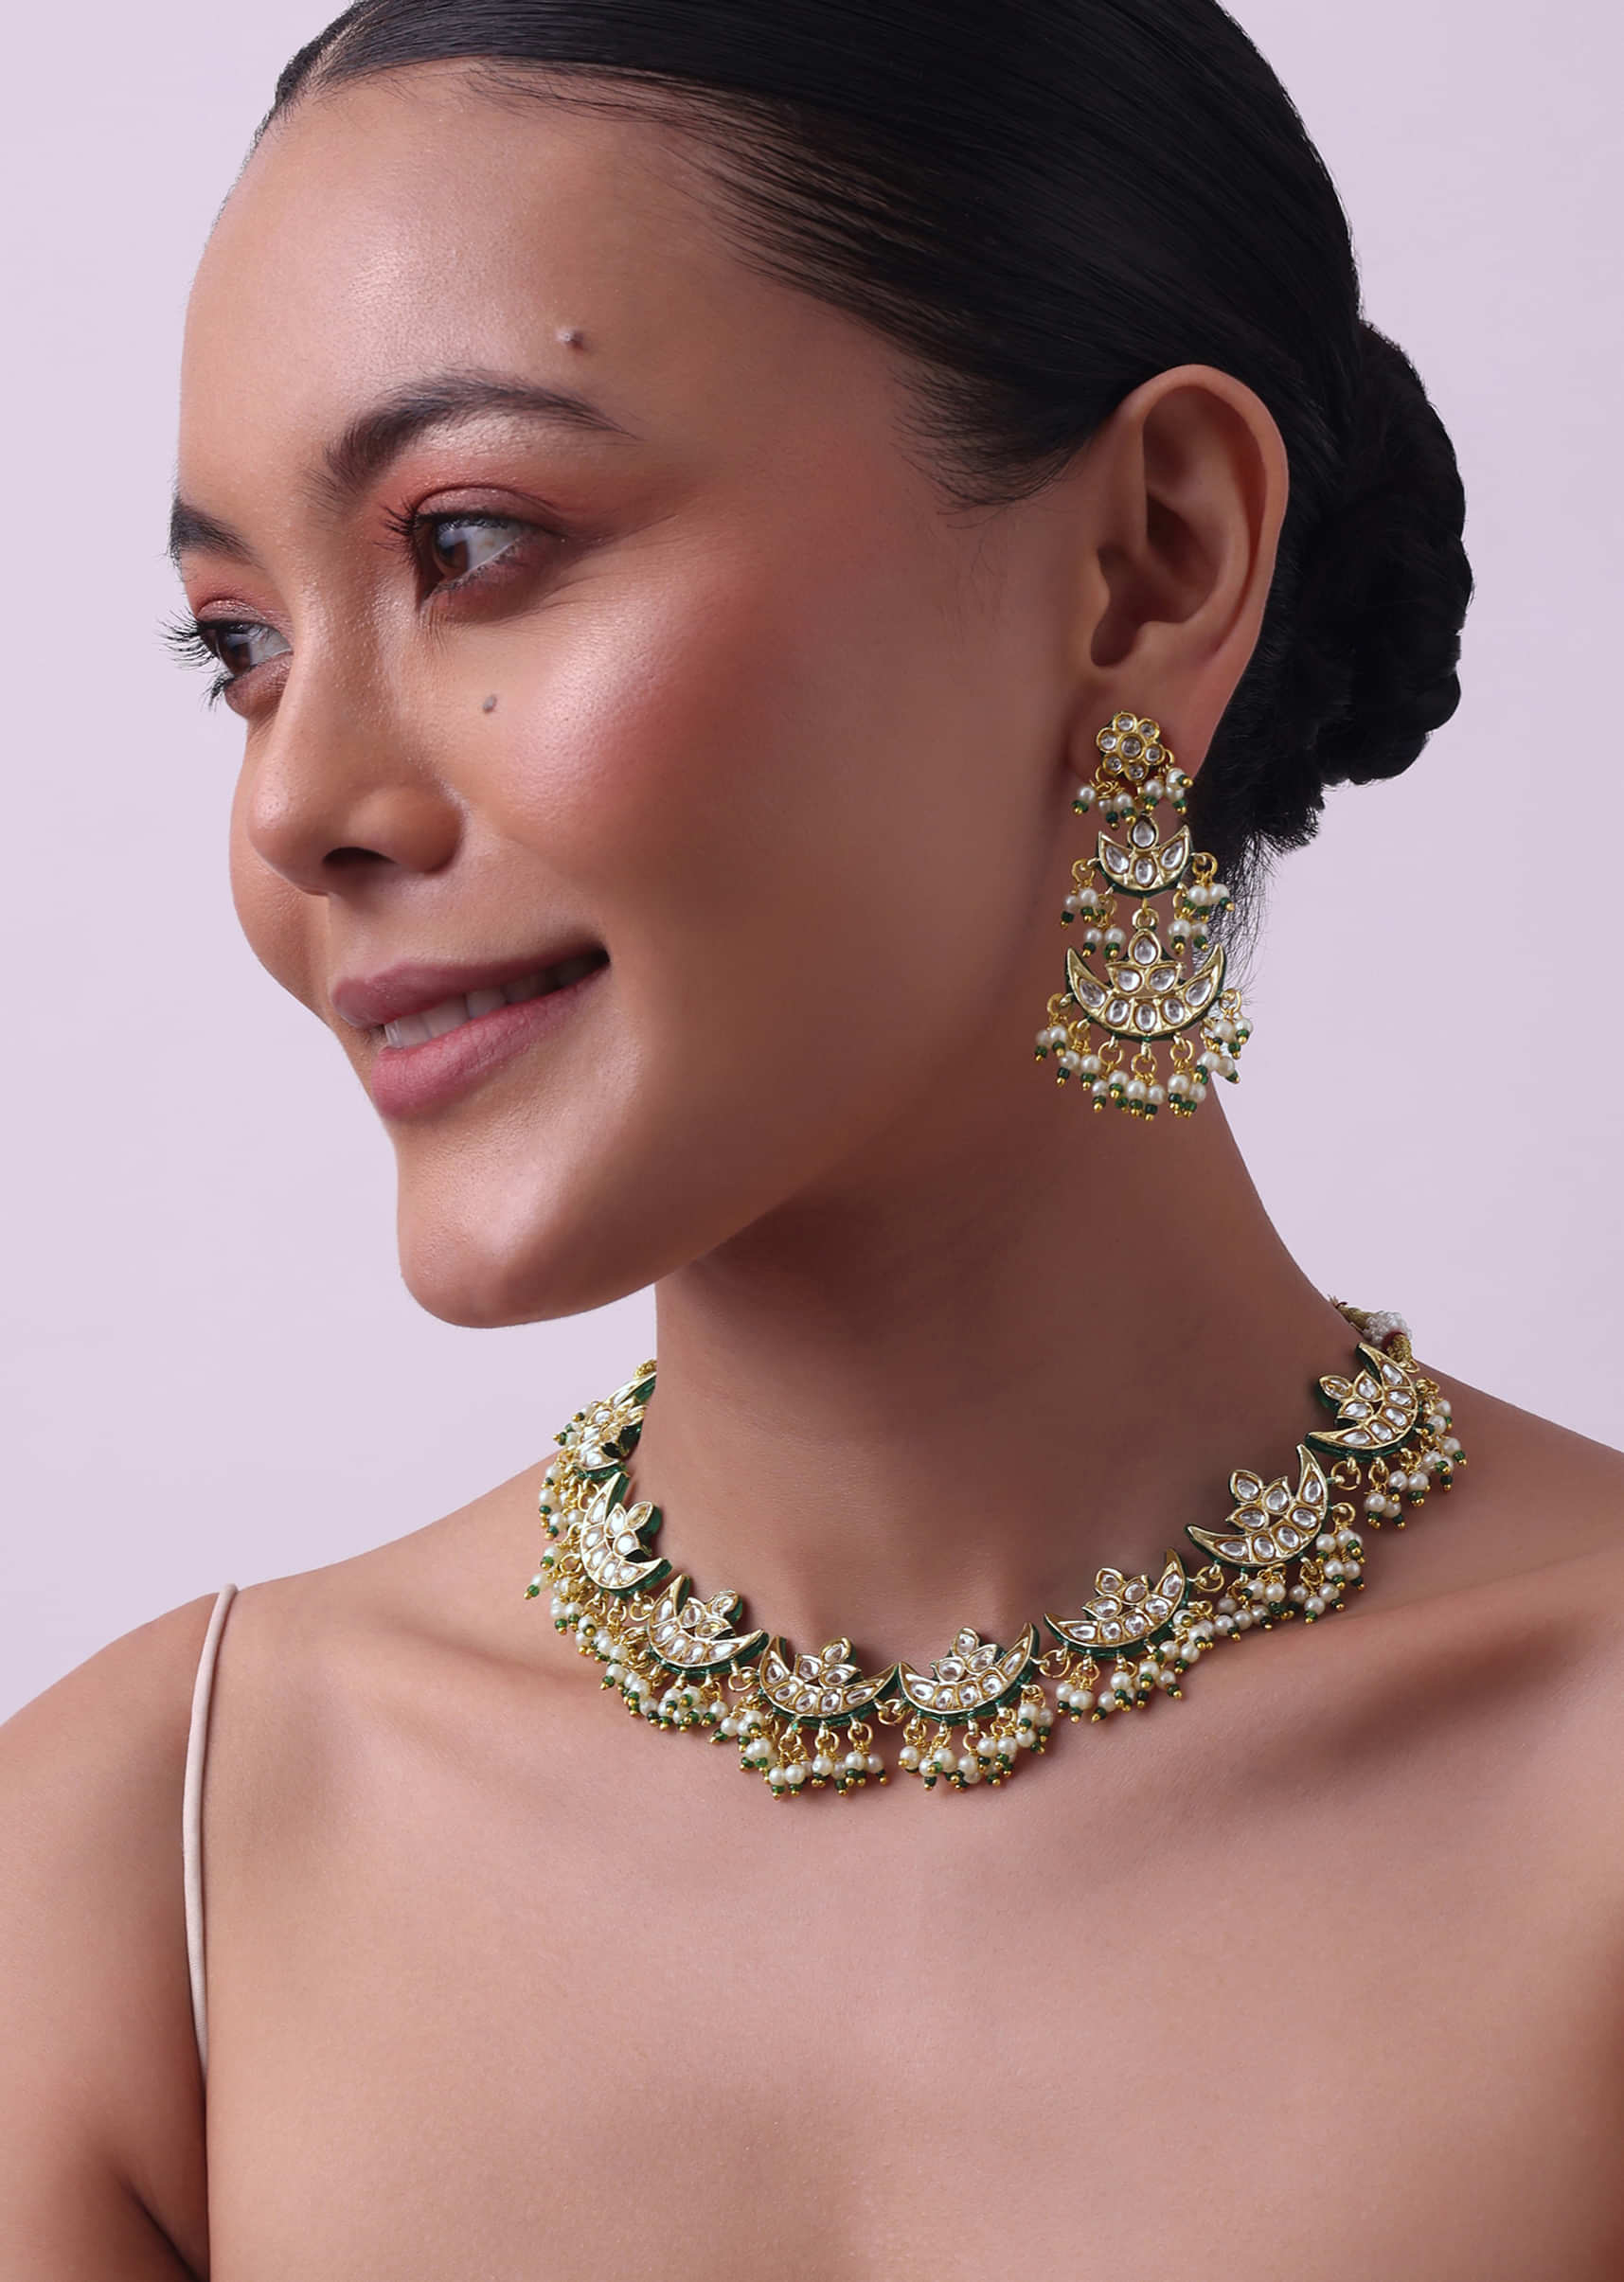 Buy Choker Necklace Set Online at India Trend – Indiatrendshop